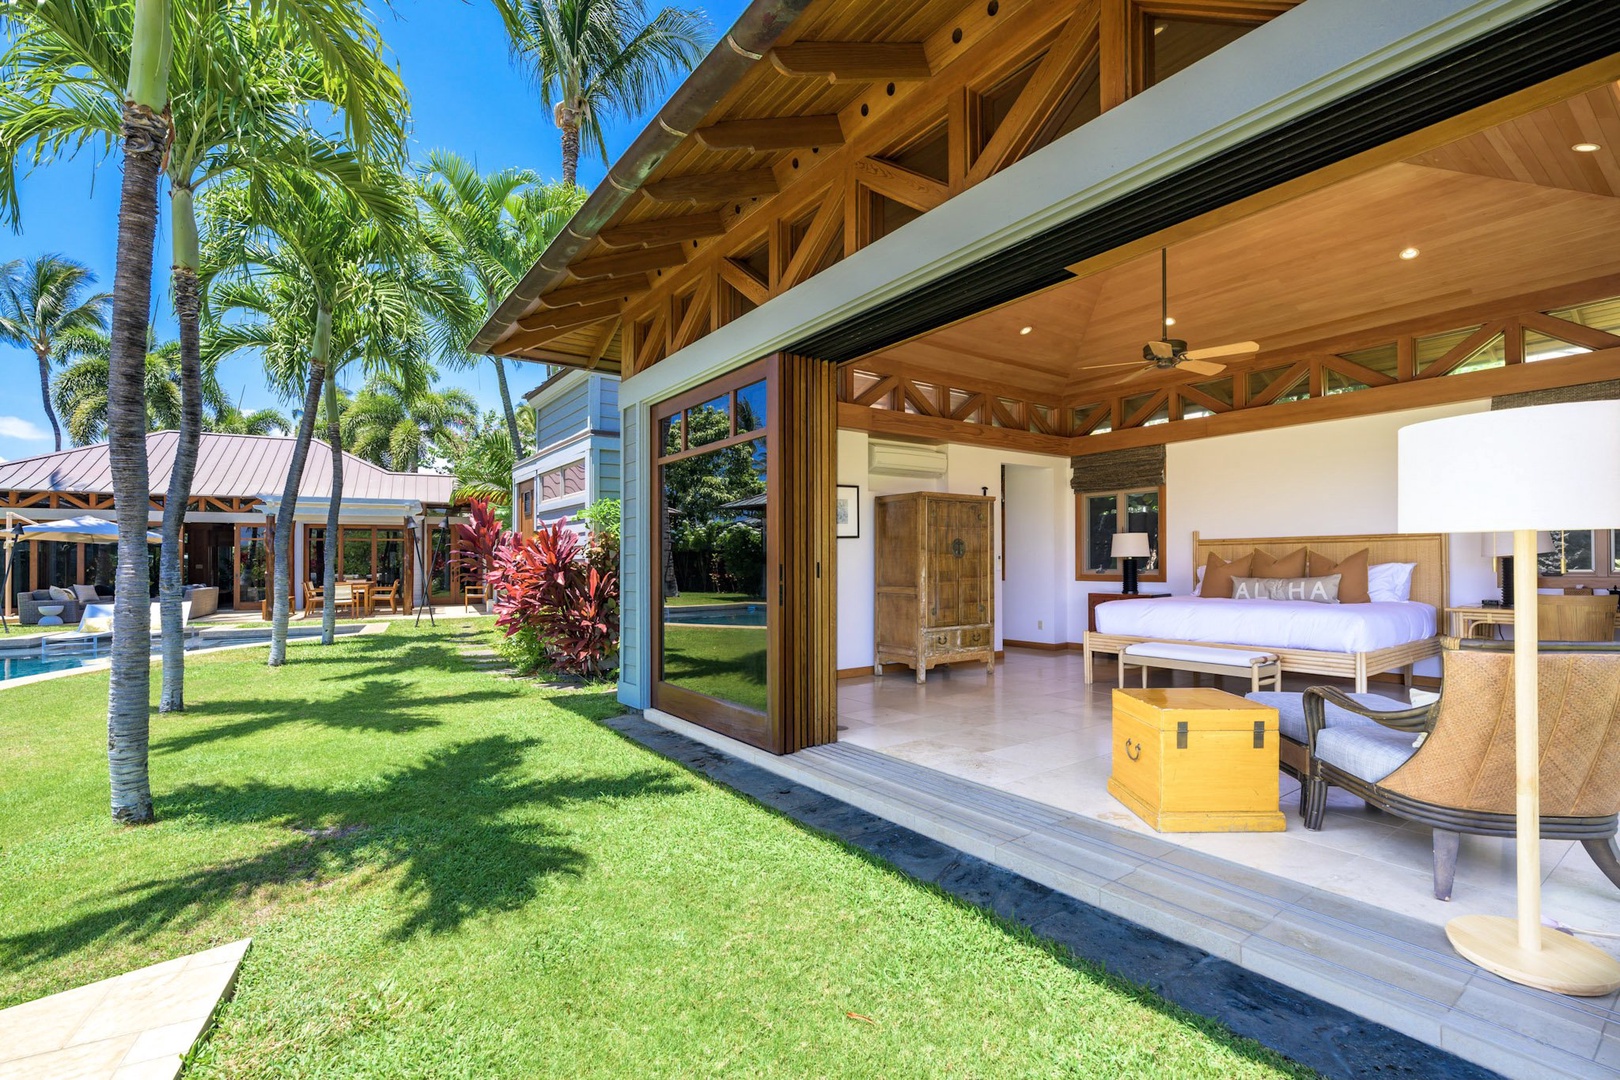 Kamuela Vacation Rentals, 3BD Na Hale 3 at Pauoa Beach Club at Mauna Lani Resort - The primary suite opening directly to the pool for seamless indoor-outdoor living.